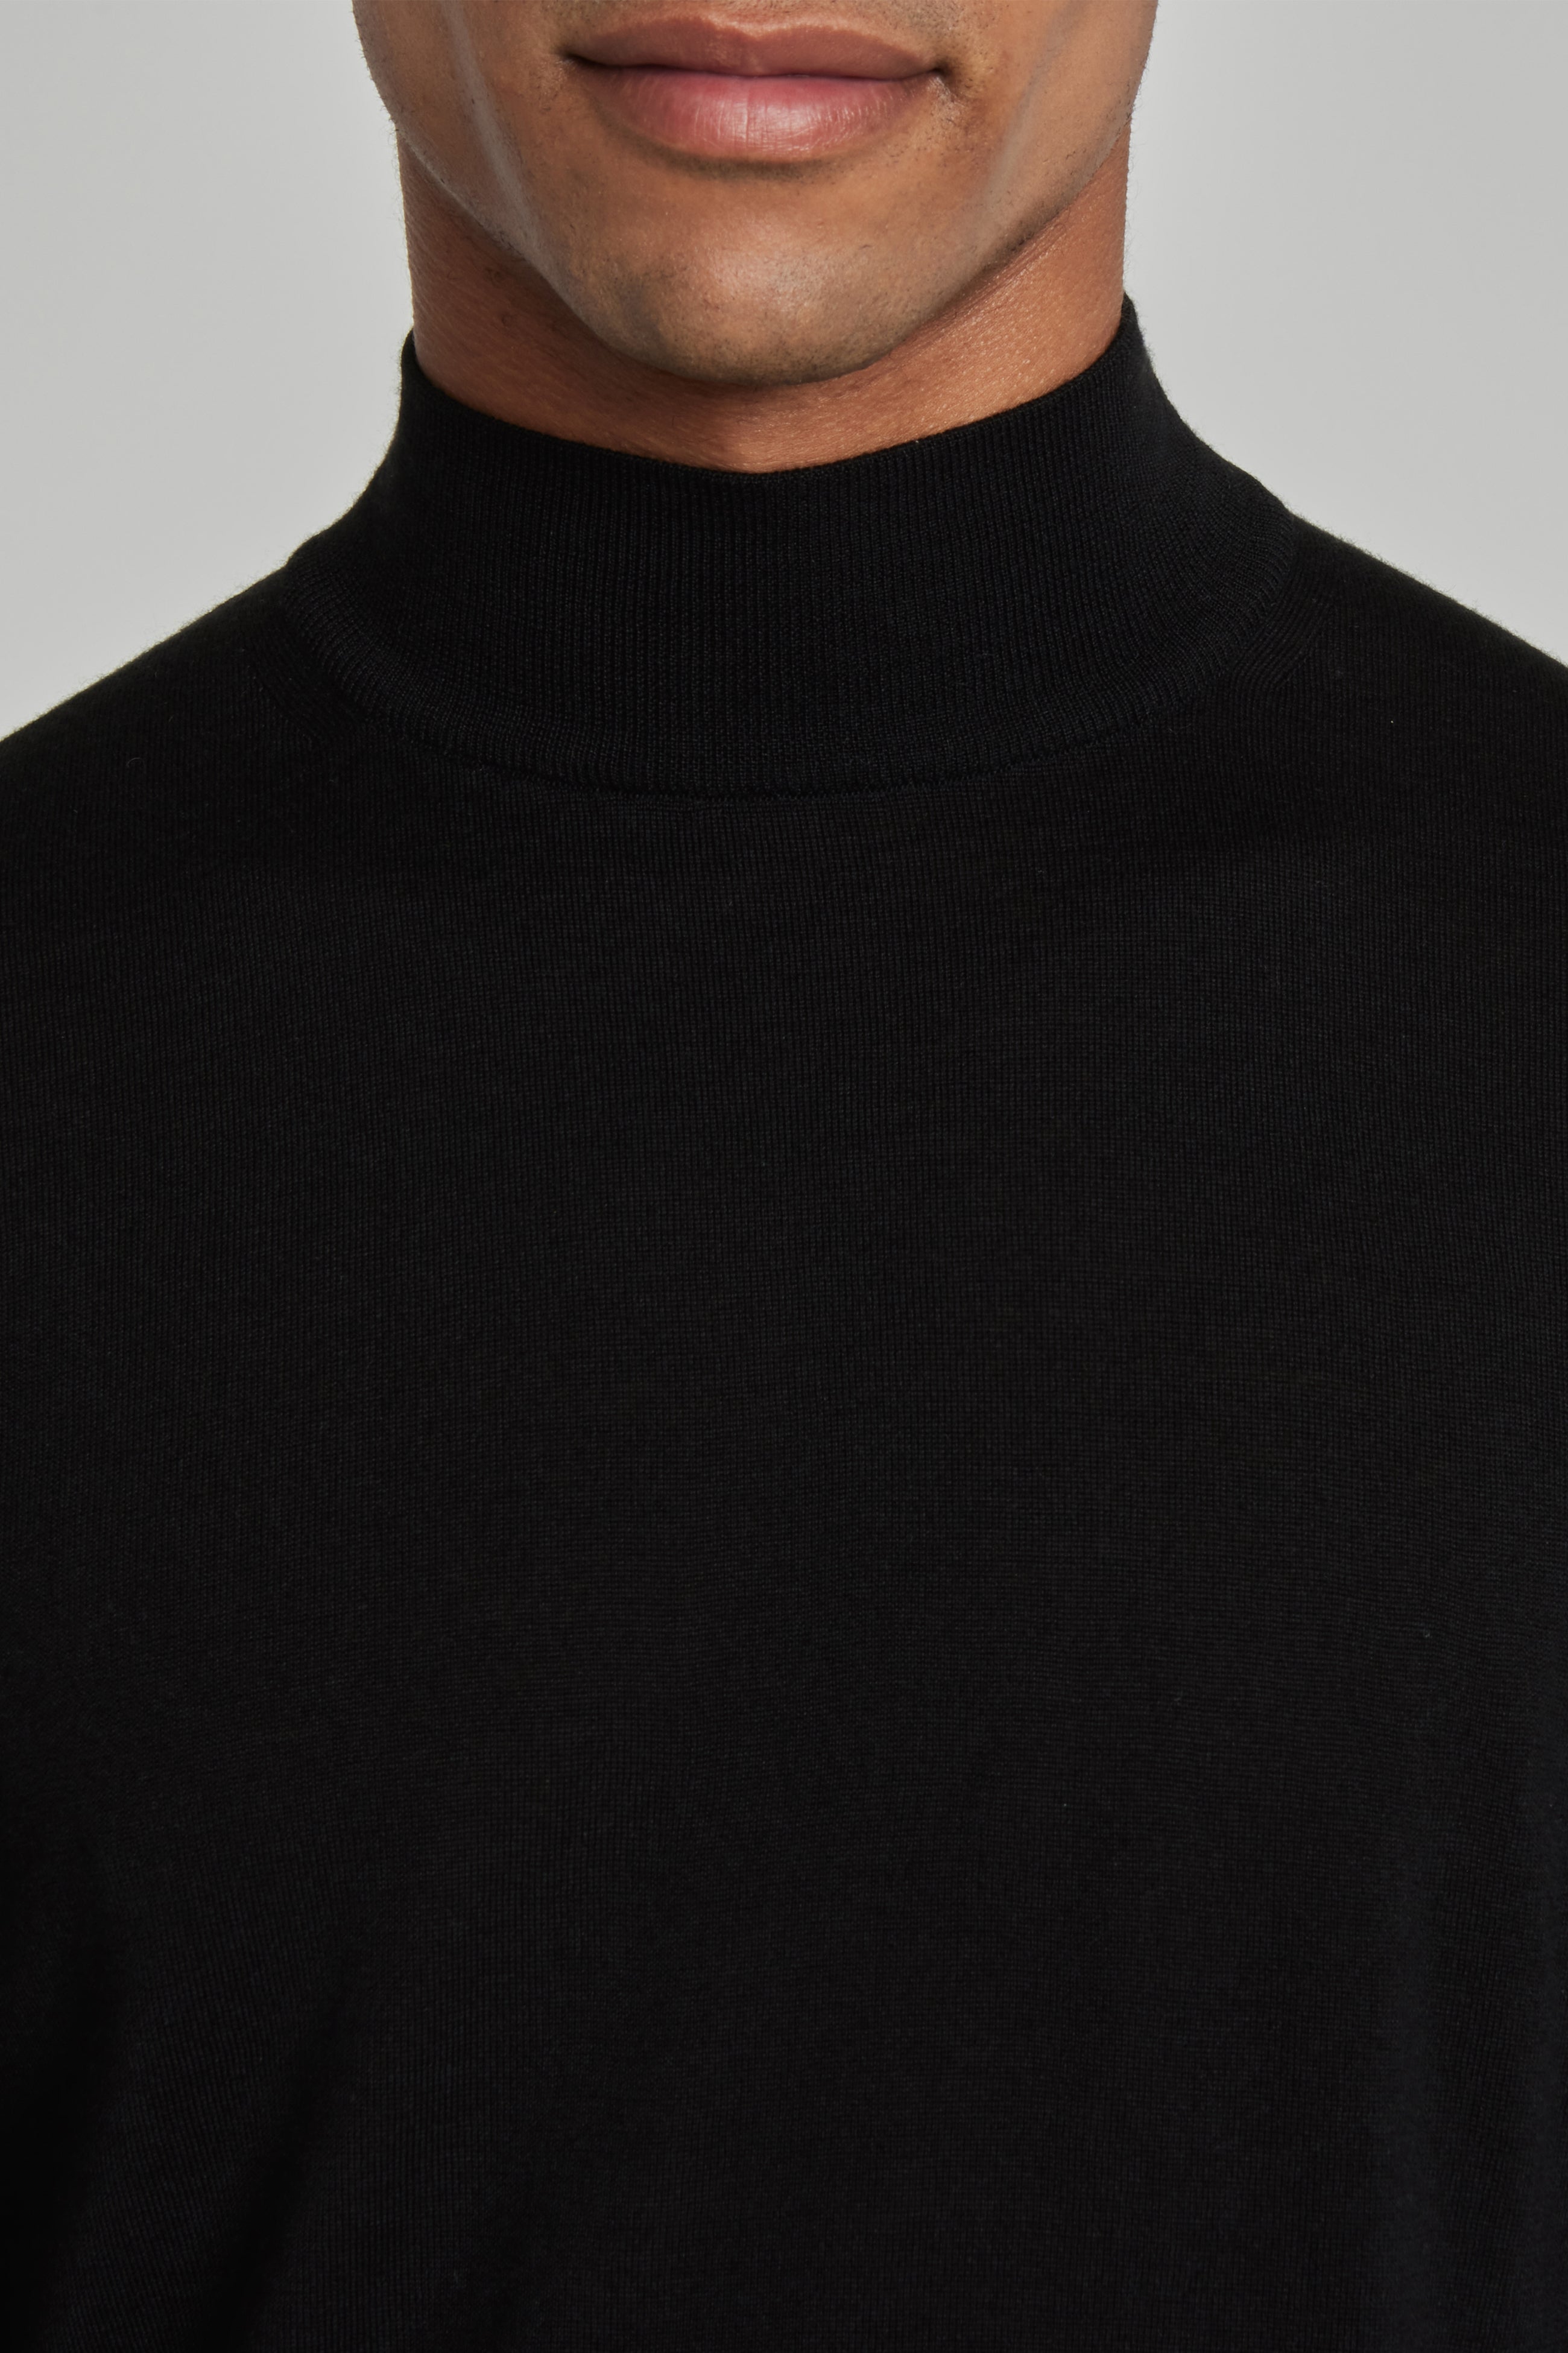 Alt view 1 Beaudry Wool, Silk and Cashmere Mock Neck Sweater in Black